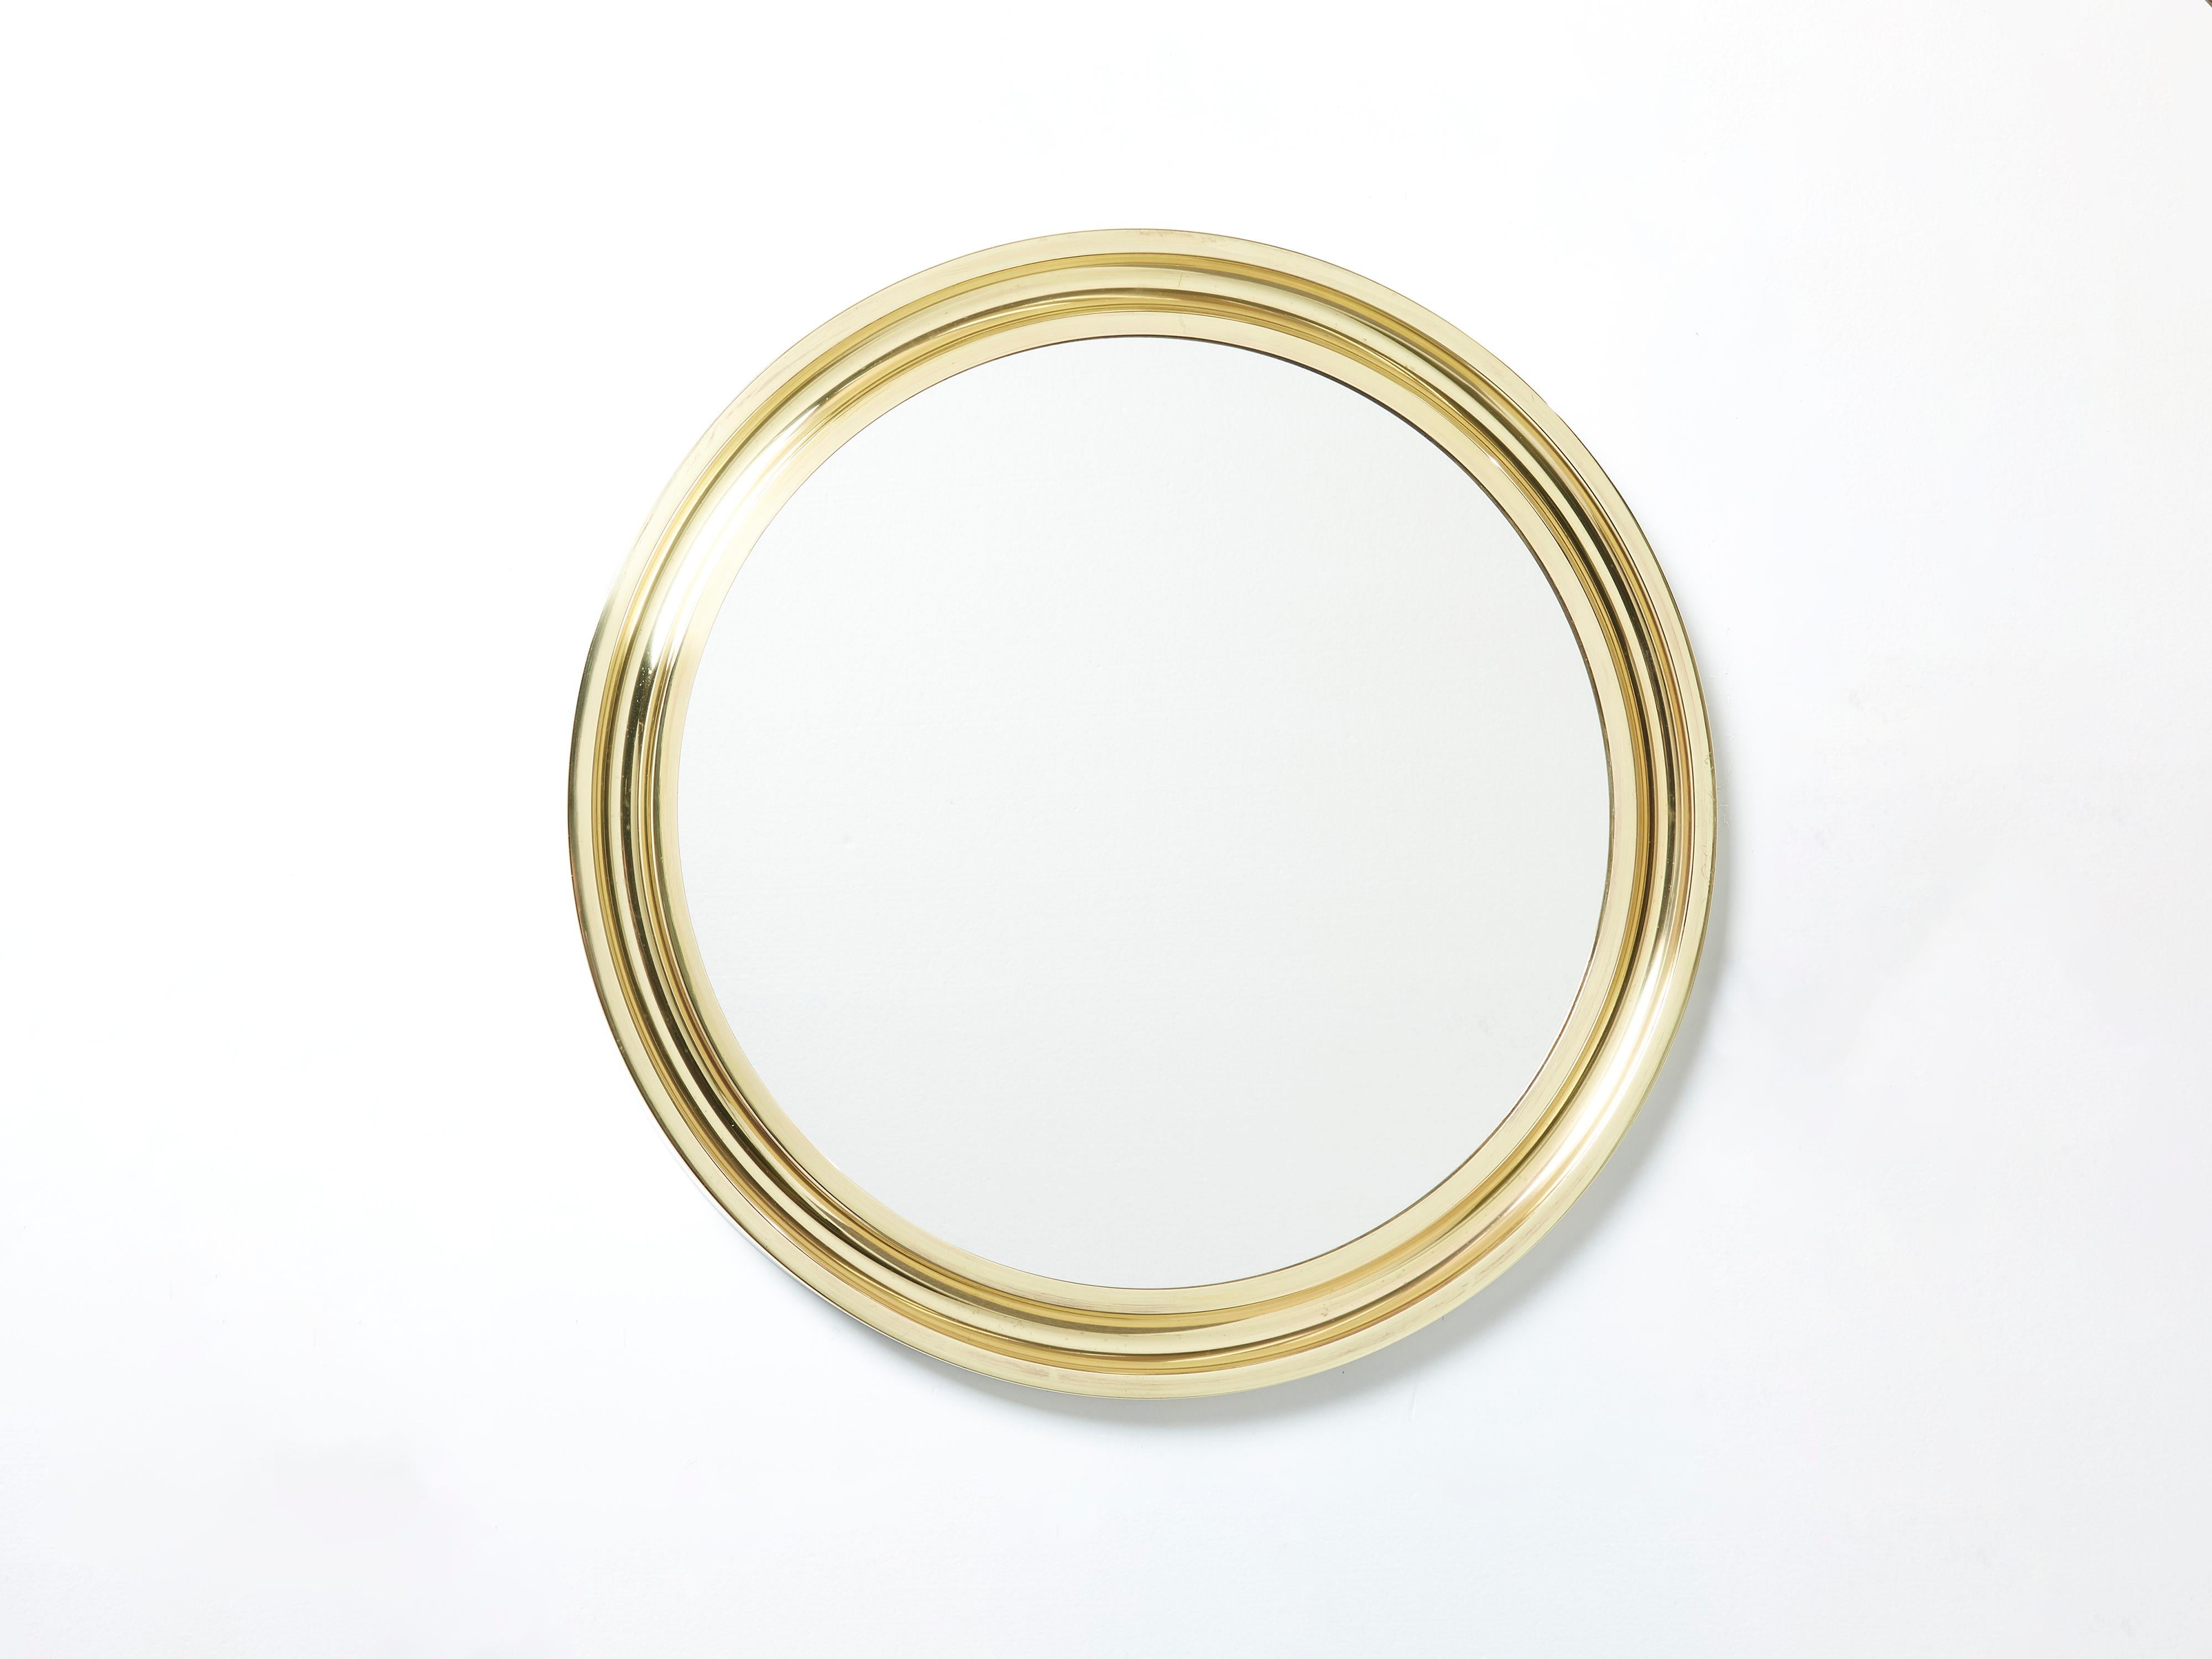 With its strong geometric design, this statement round brass mirror “Narciso” was designed by Italian Sergio Mazza for Artemide in the late 1960s. A perfect mirror for an entrance, or powder room. Found in very good vintage condition and made with